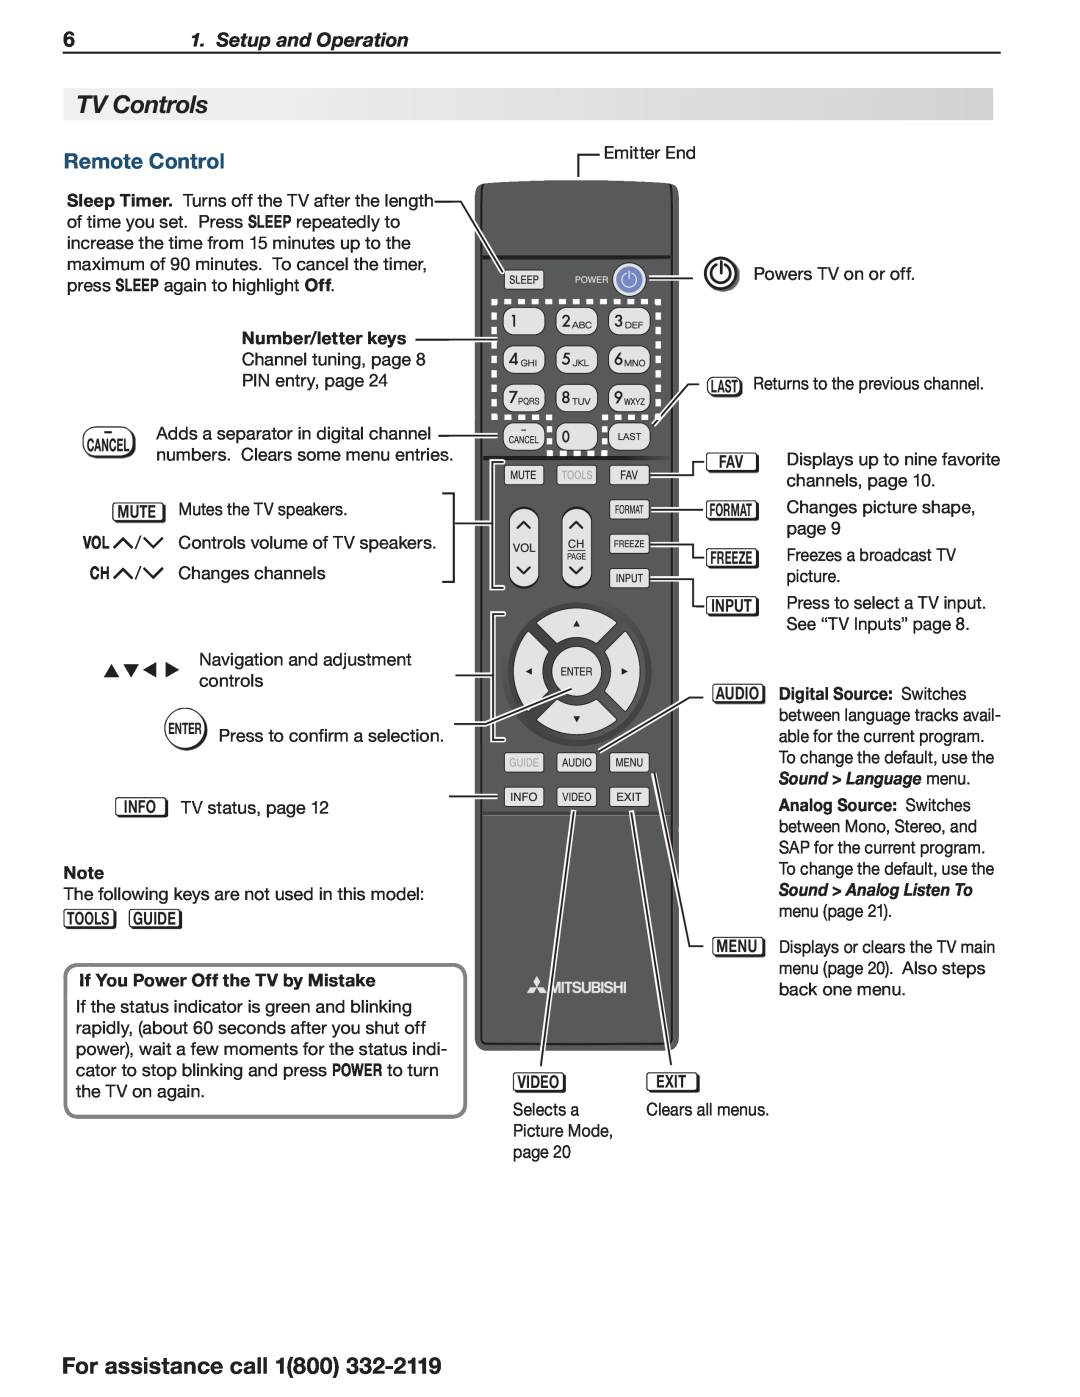 Mitsumi electronic C10 SERIES manual TV Controls, Remote Control, Setup and Operation, Sound Analog Listen To menu page 